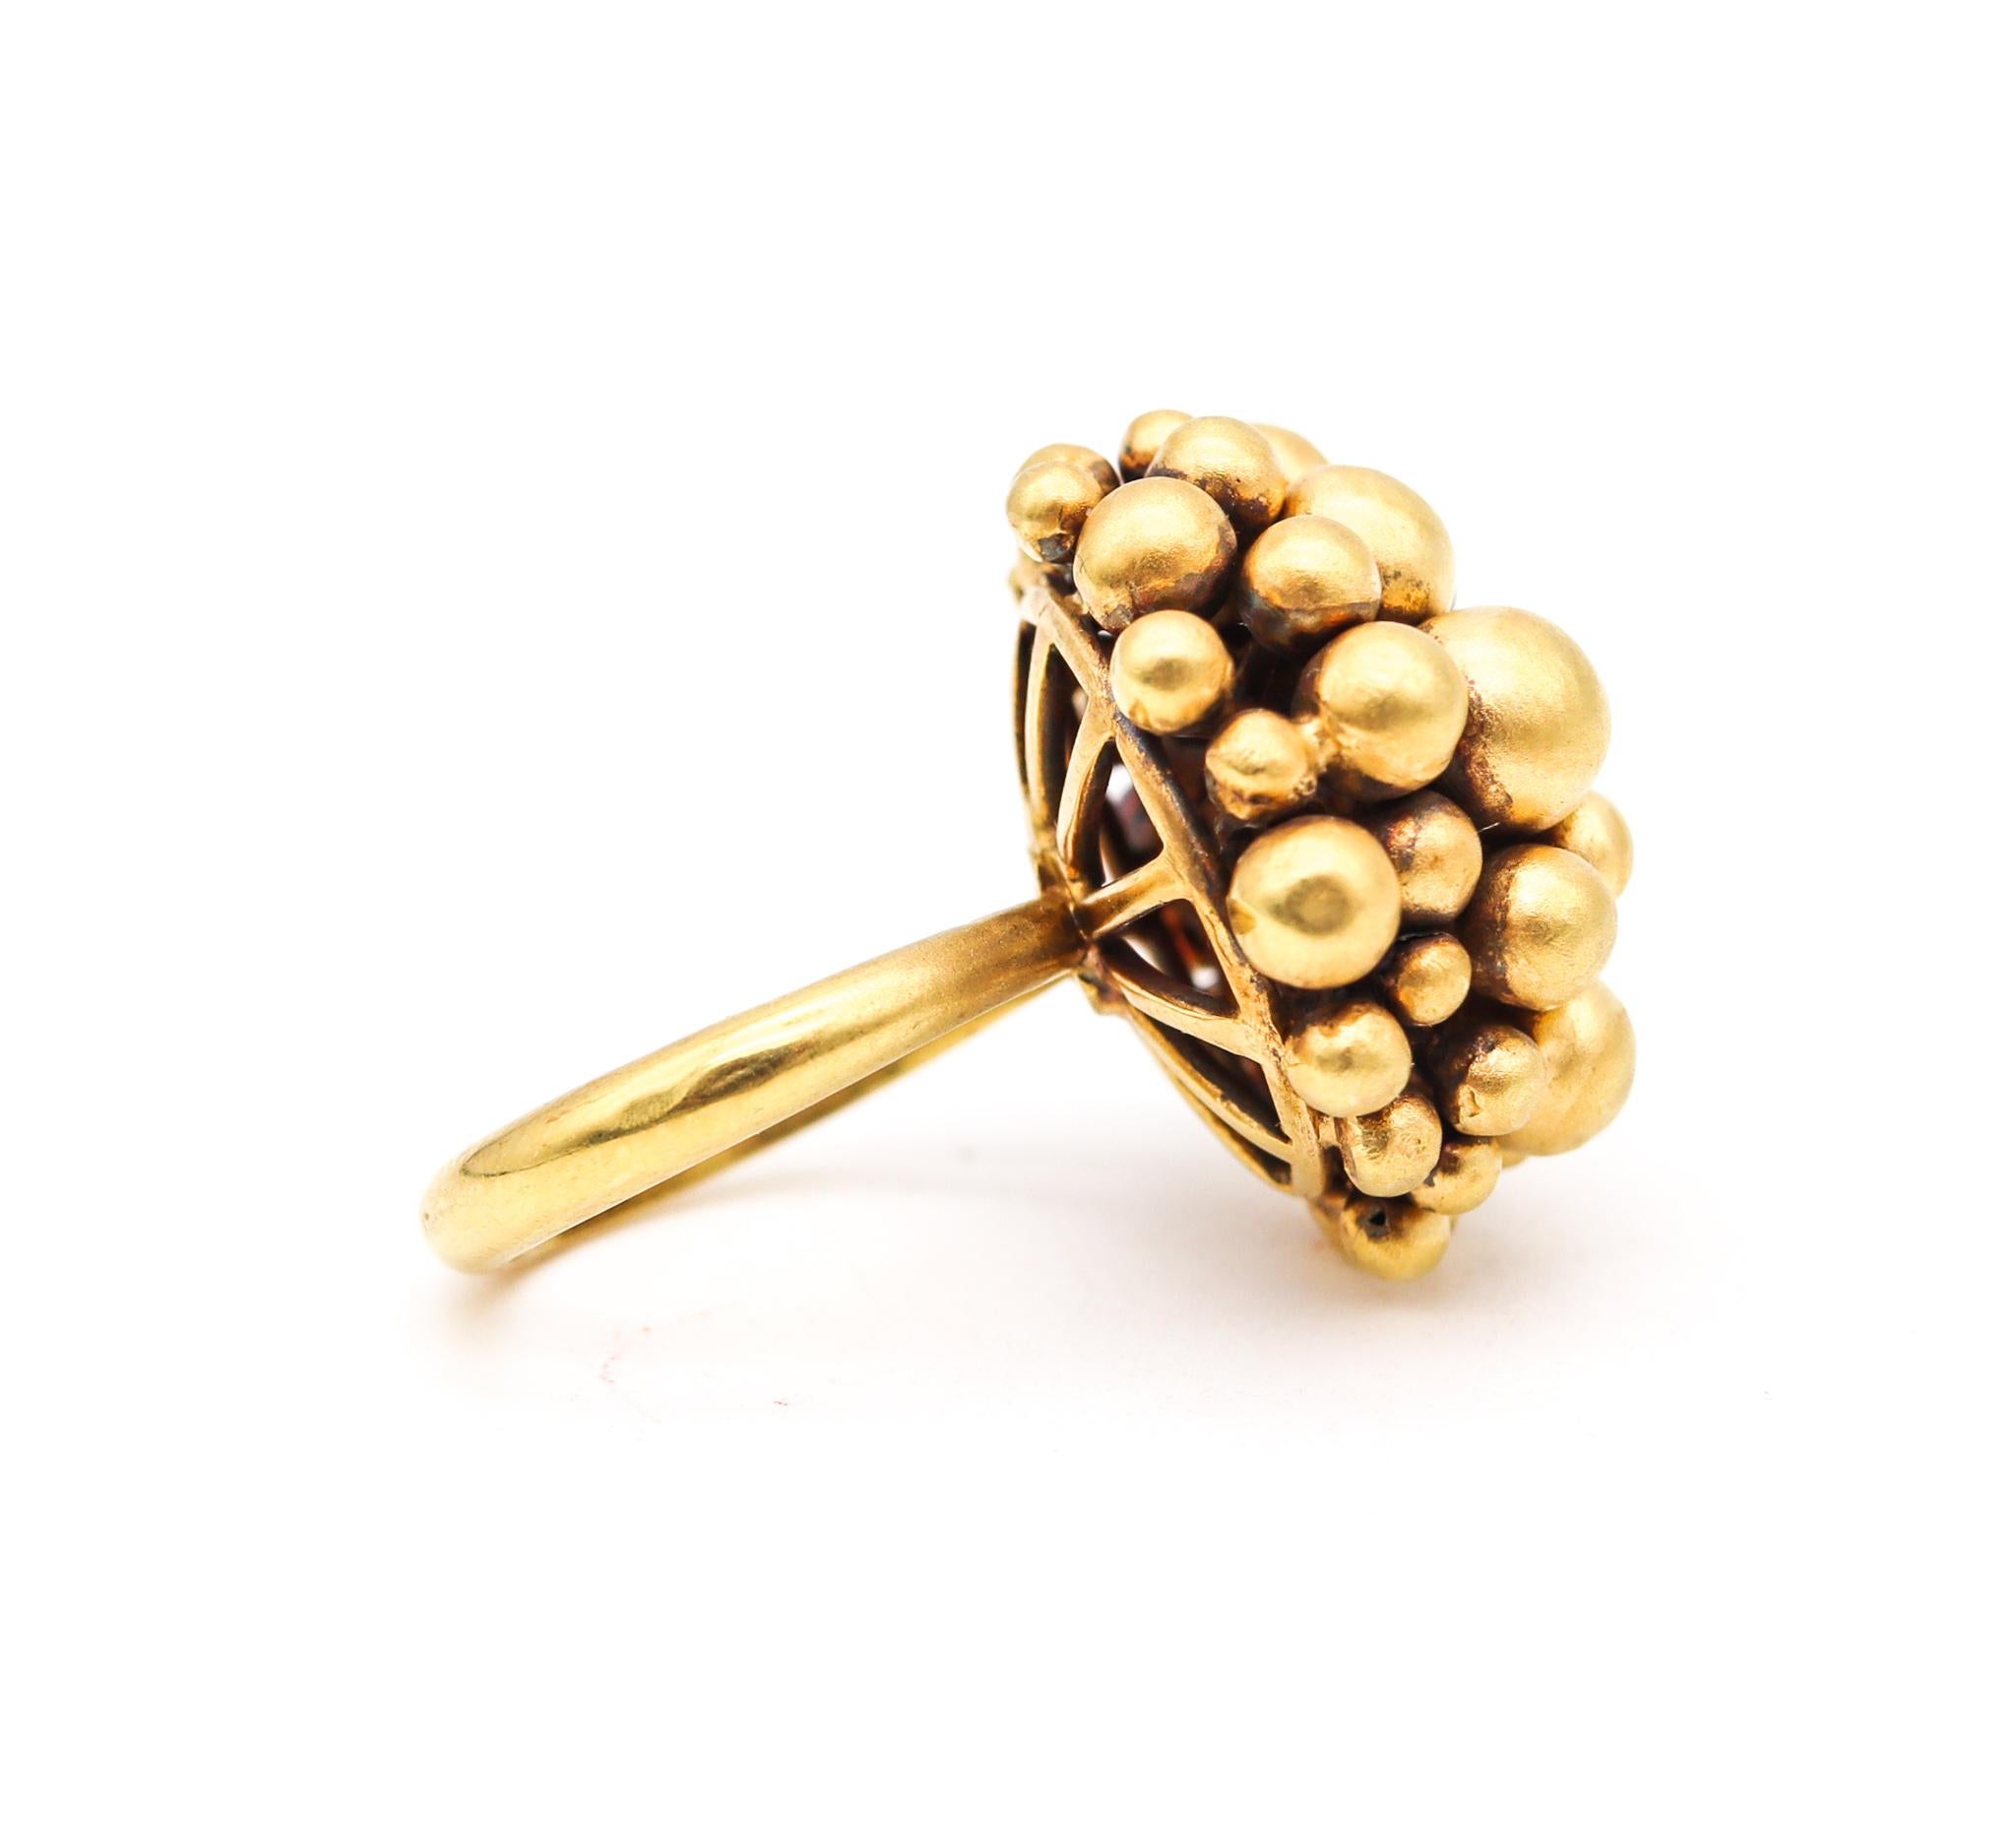 Women's German 1970 Sculptural Modernism Cocktail Ring in Brushed 18Kt Yellow Gold